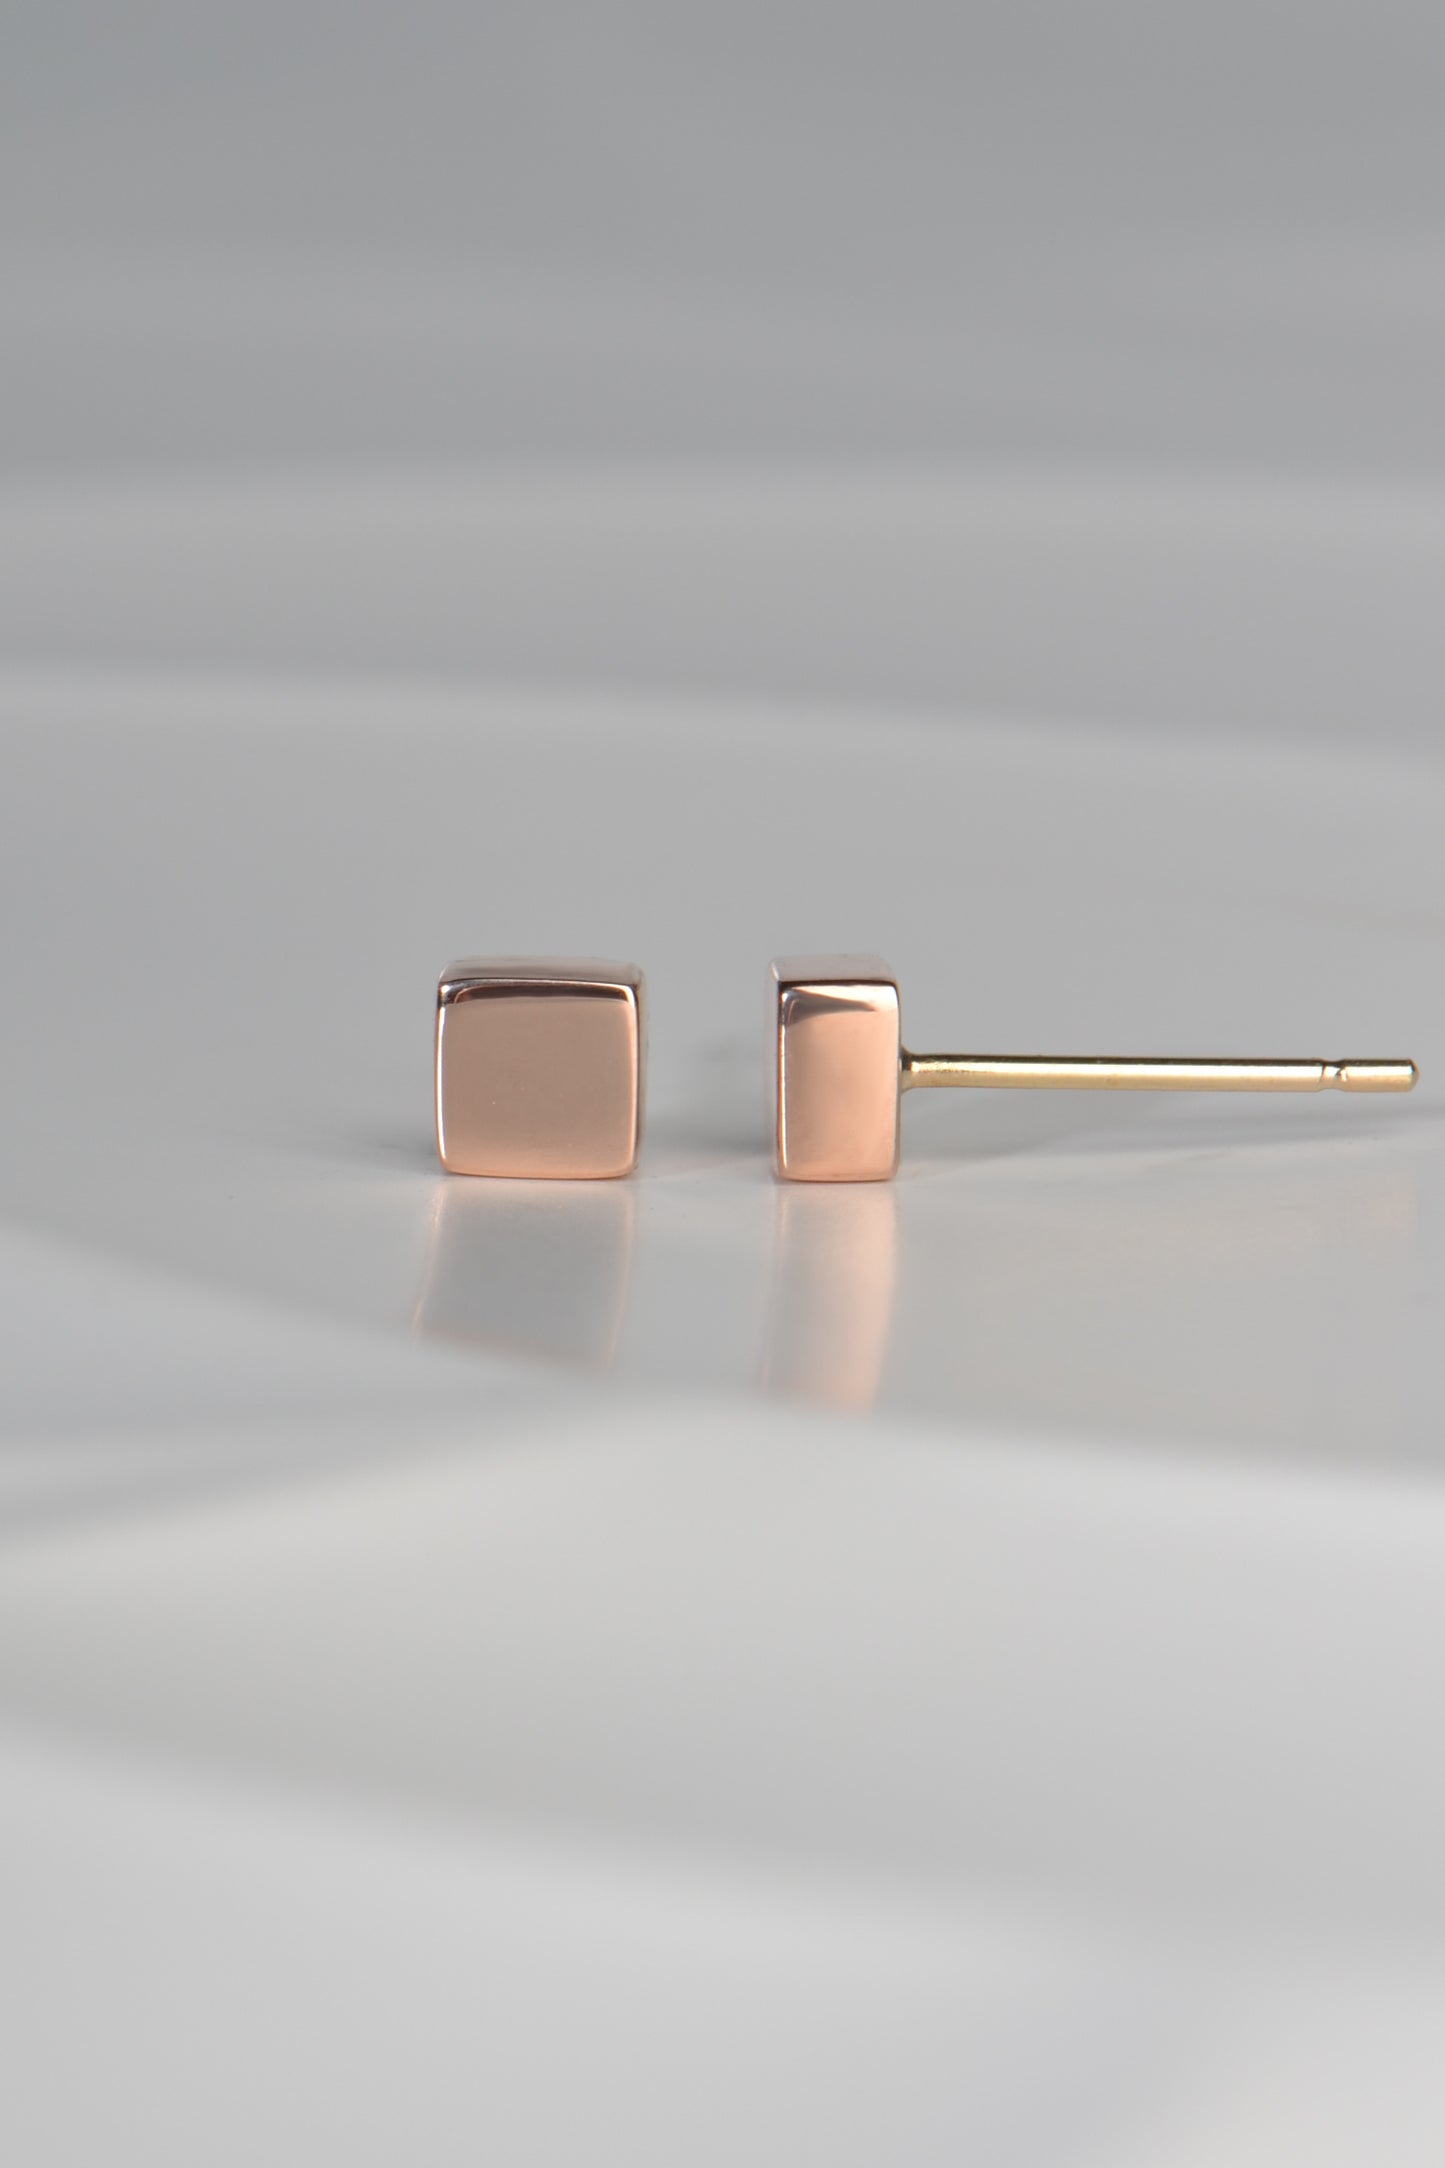 side view of rose gold 5mm square earrings showing that they are deep and substantial and look like minature blocks of stone.